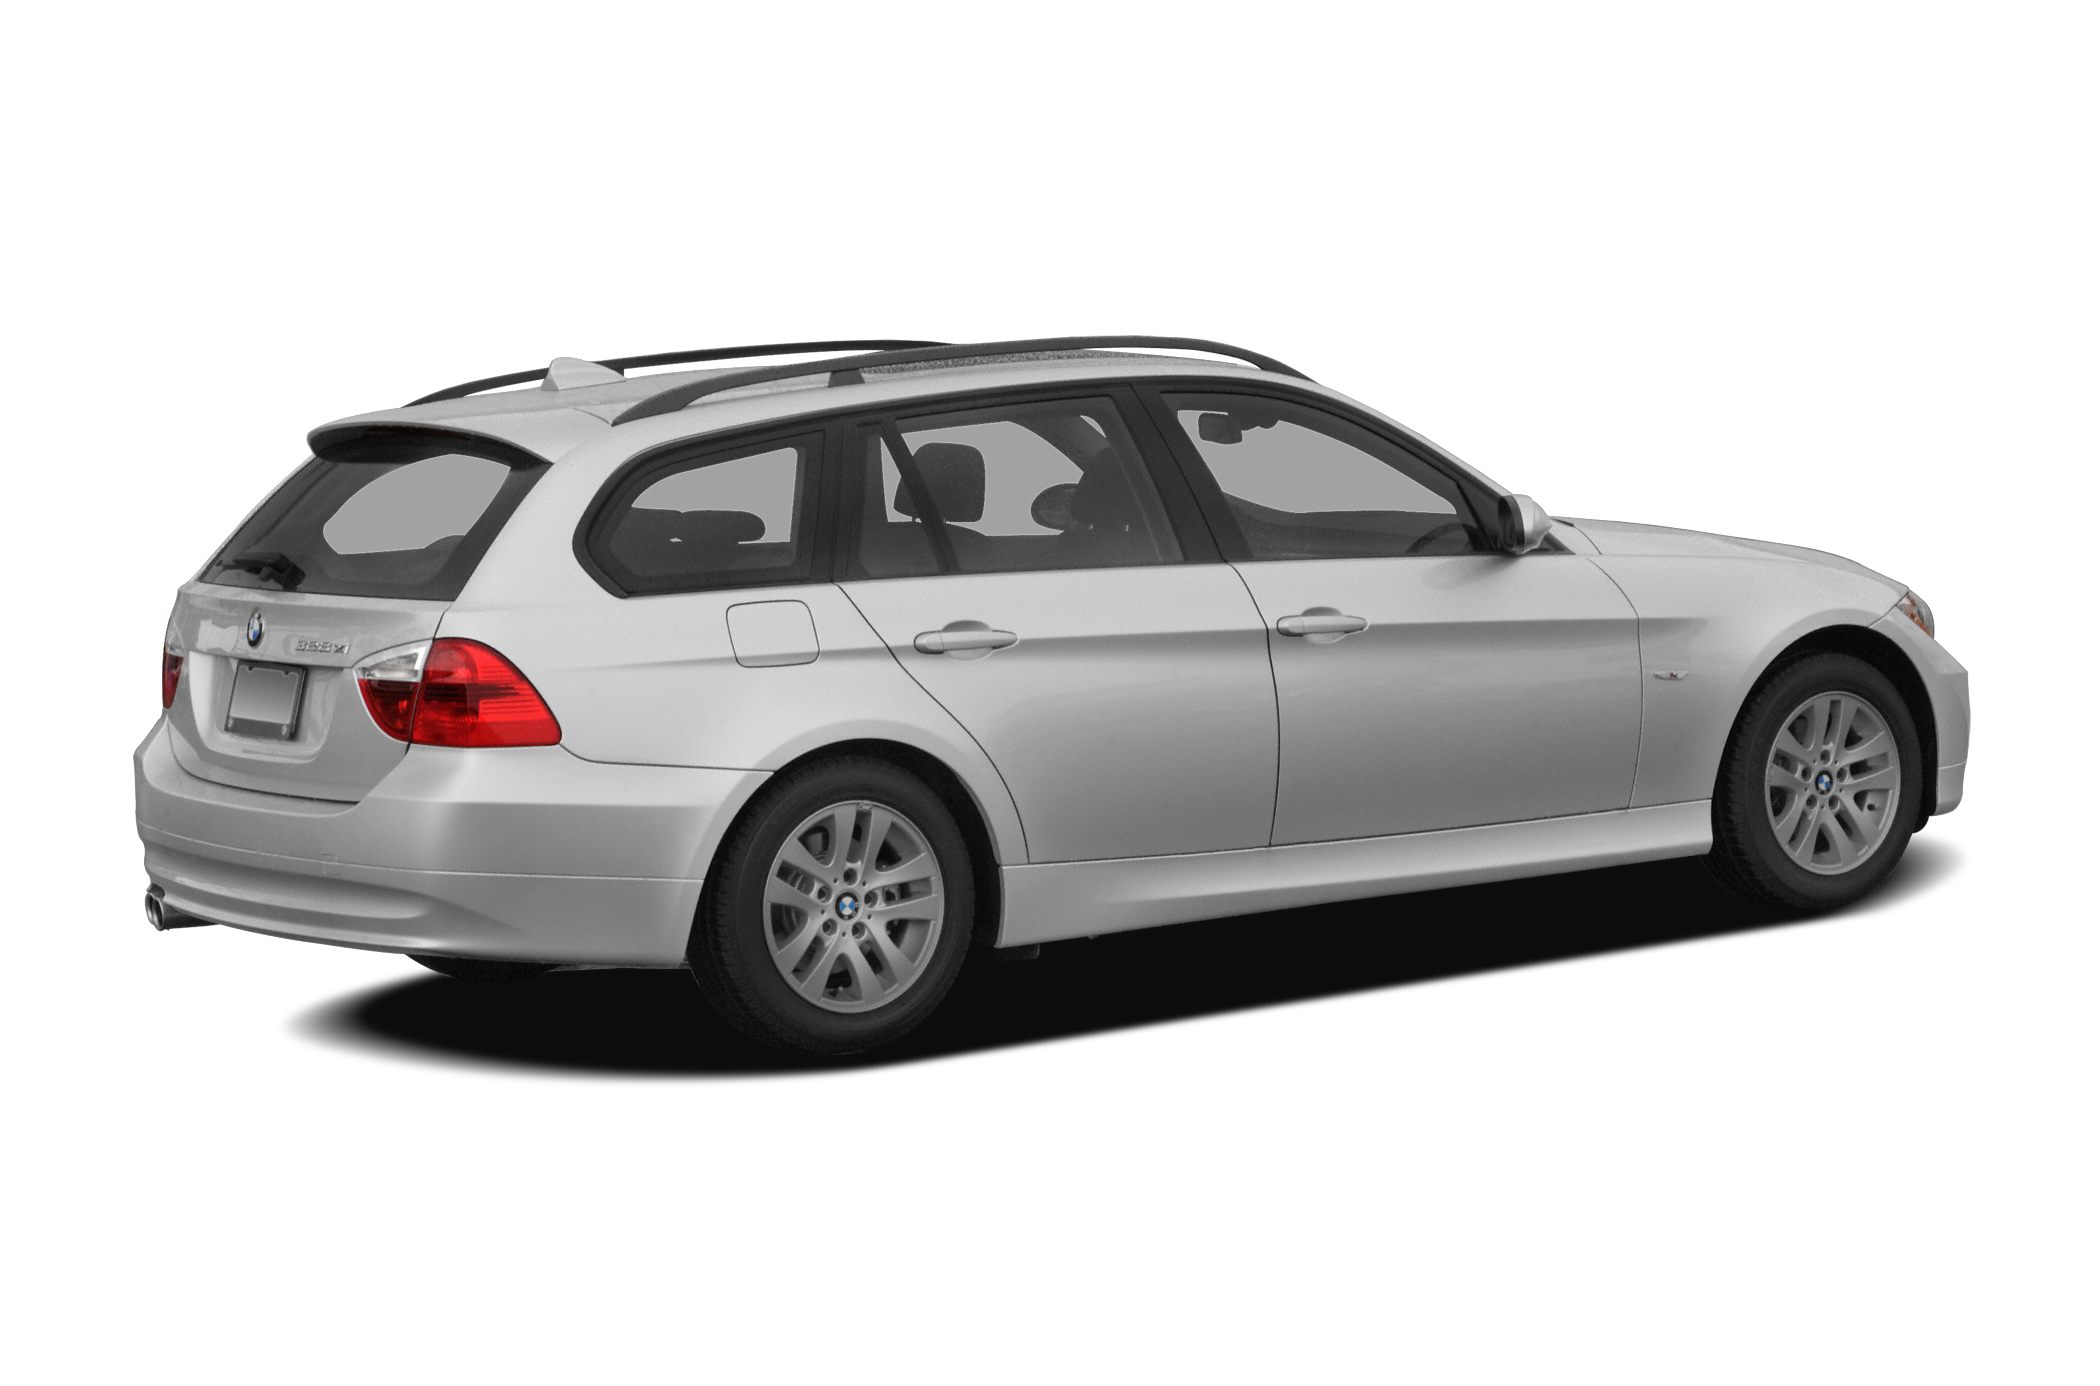 Used bmw cars for sale in wisconsin #3